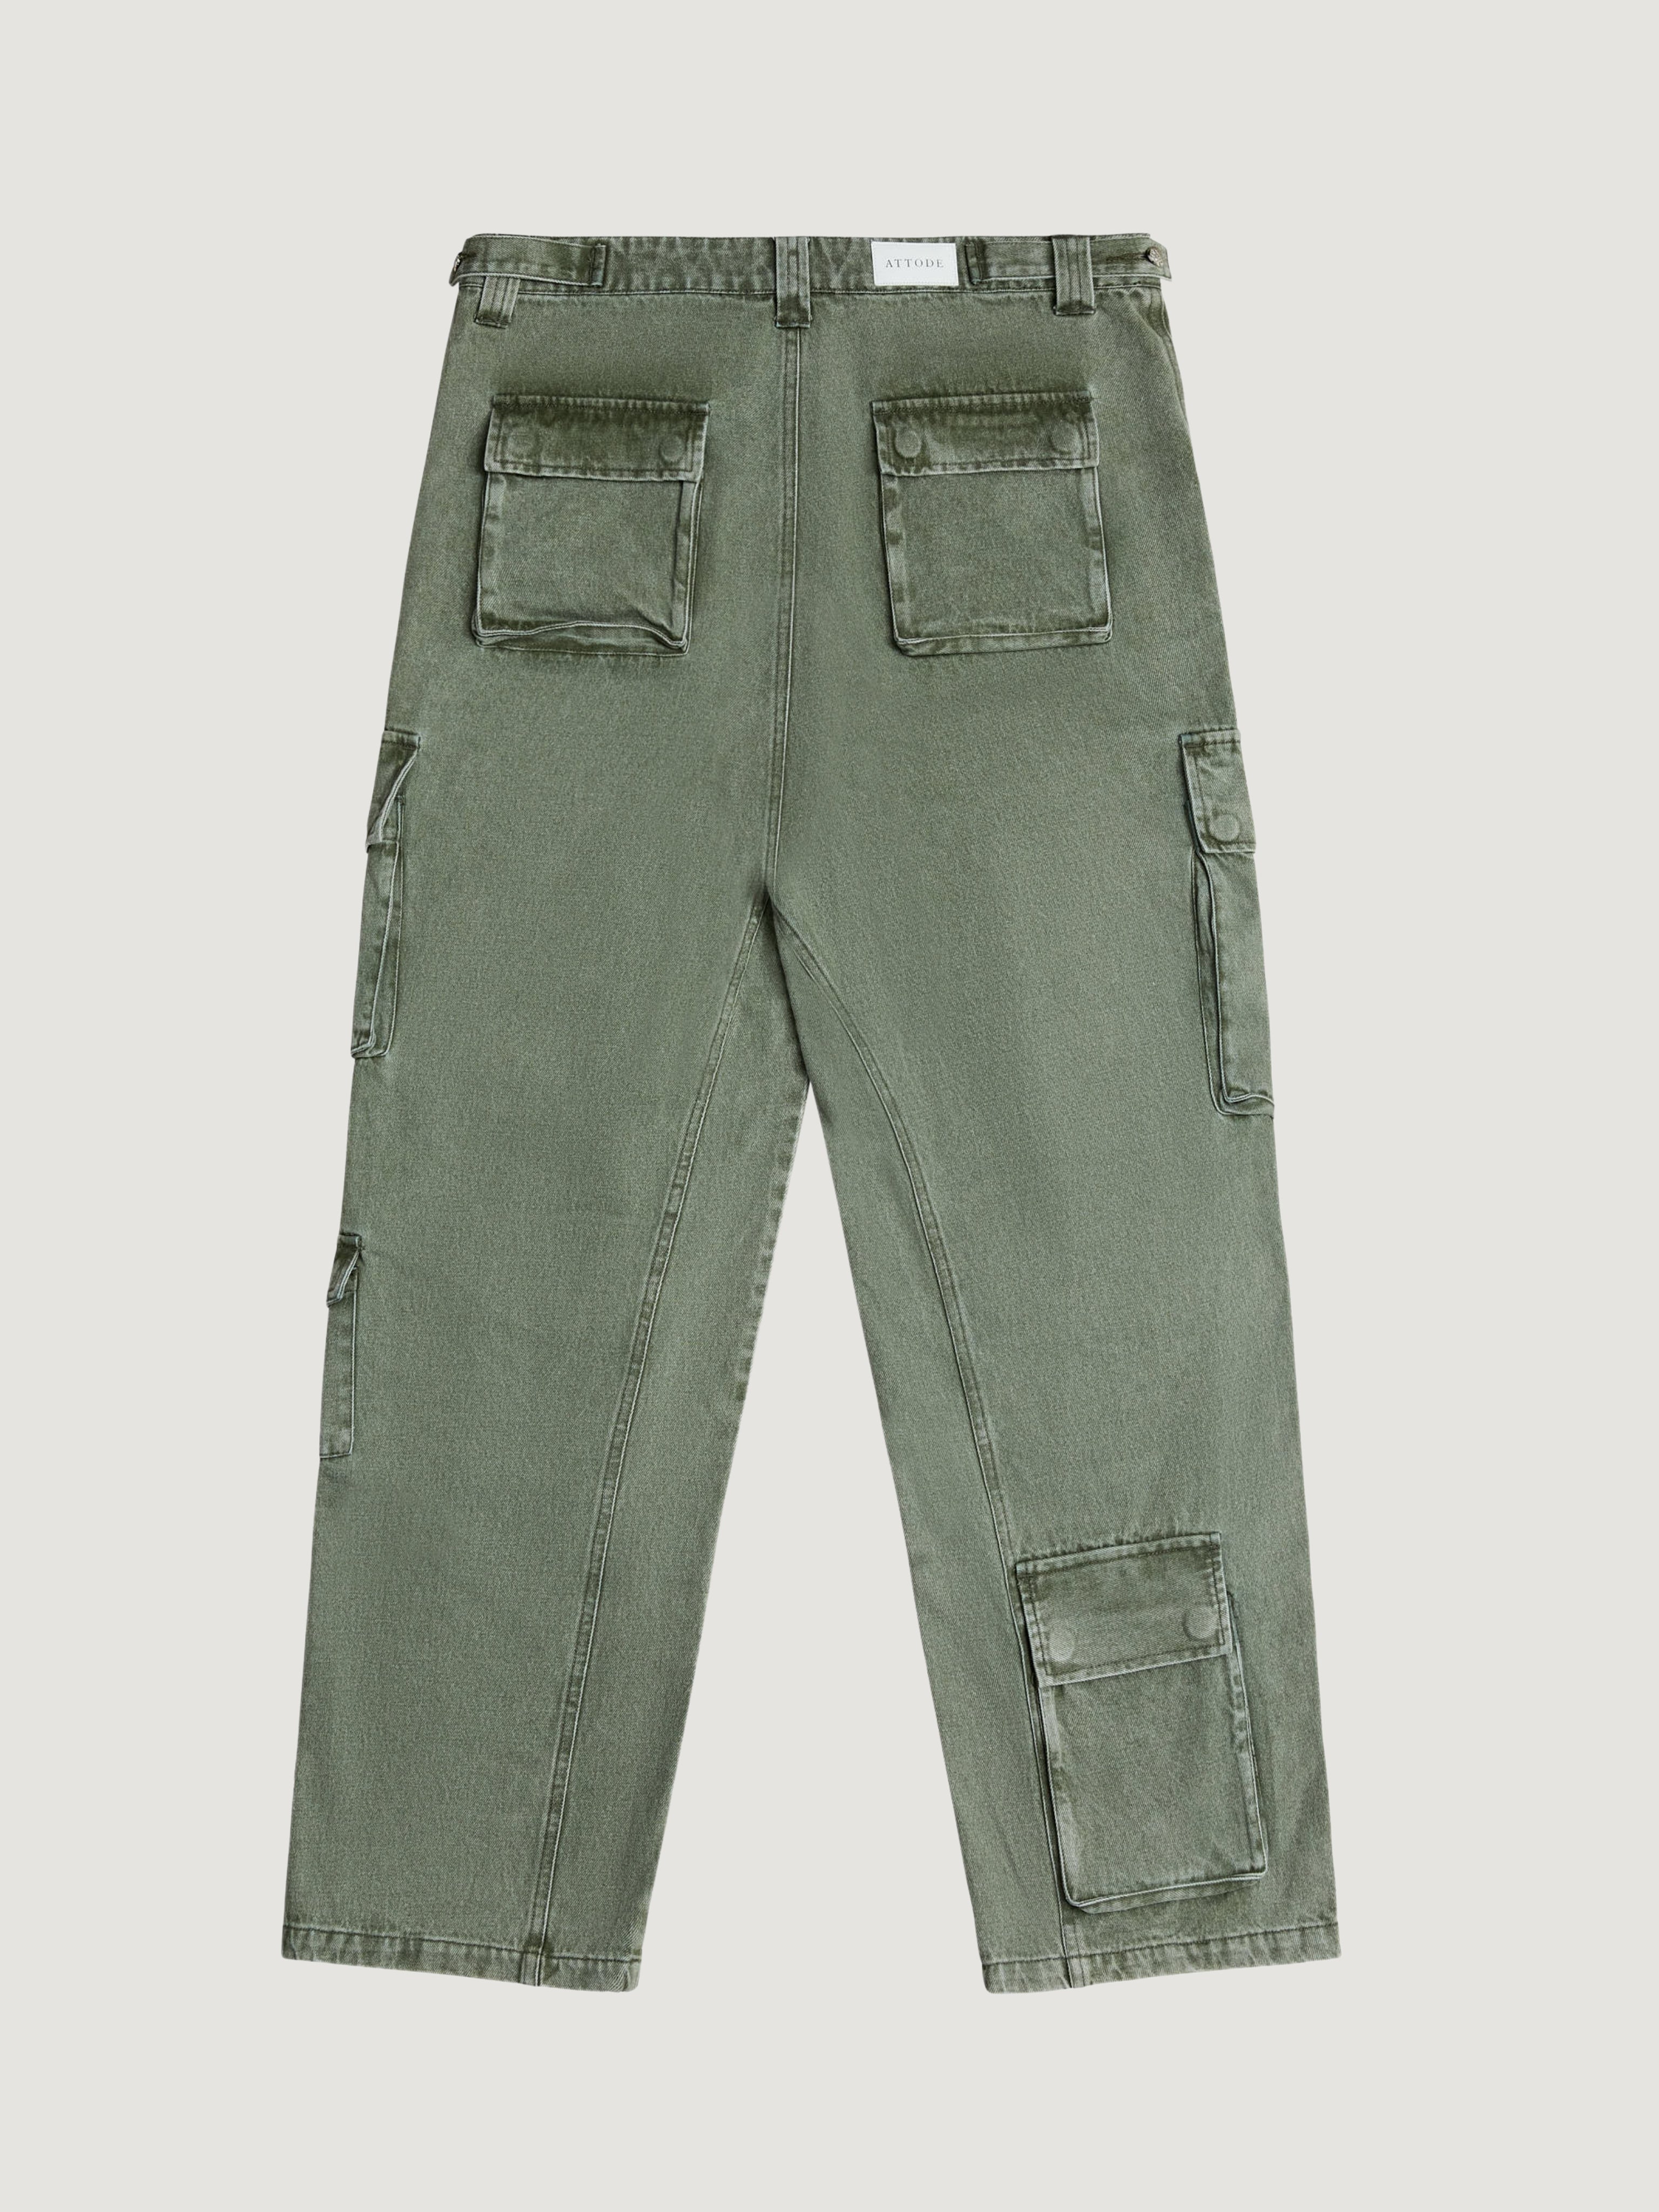 WASHED CARGO PANTS OLIVE GREEN